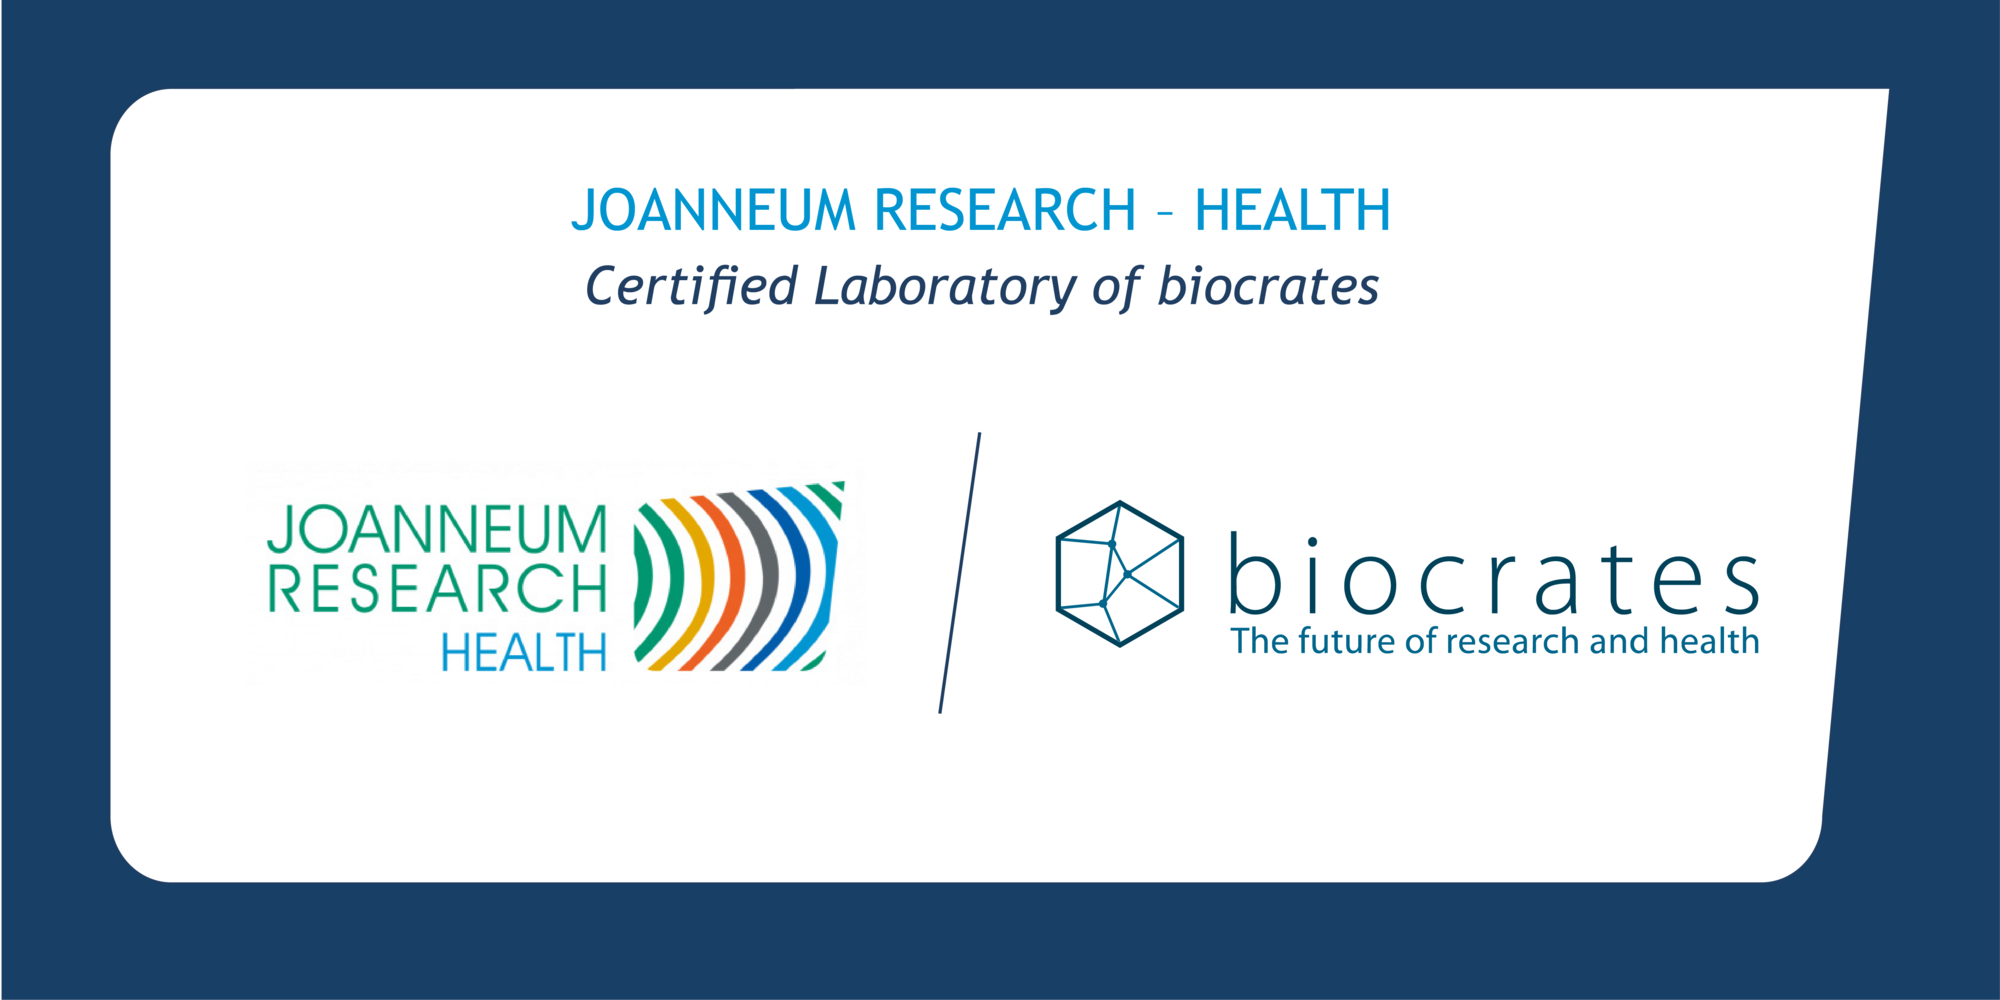 JOANNEUM RESEARCH – HEALTH is a new certified laboratory of biocrates